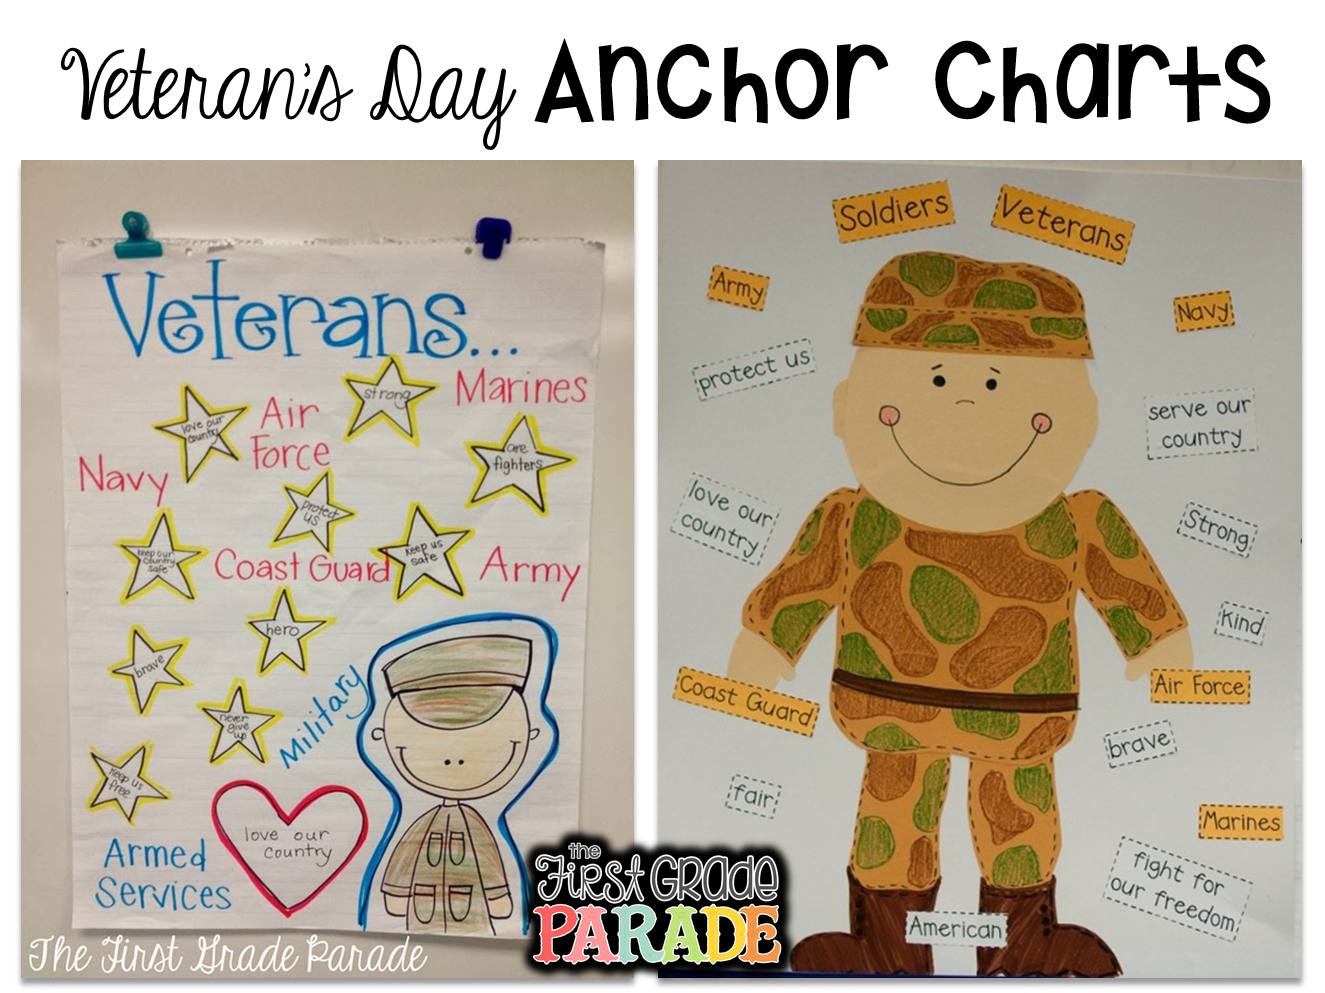 What are some interesting school activities that students can do for Veterans Day?